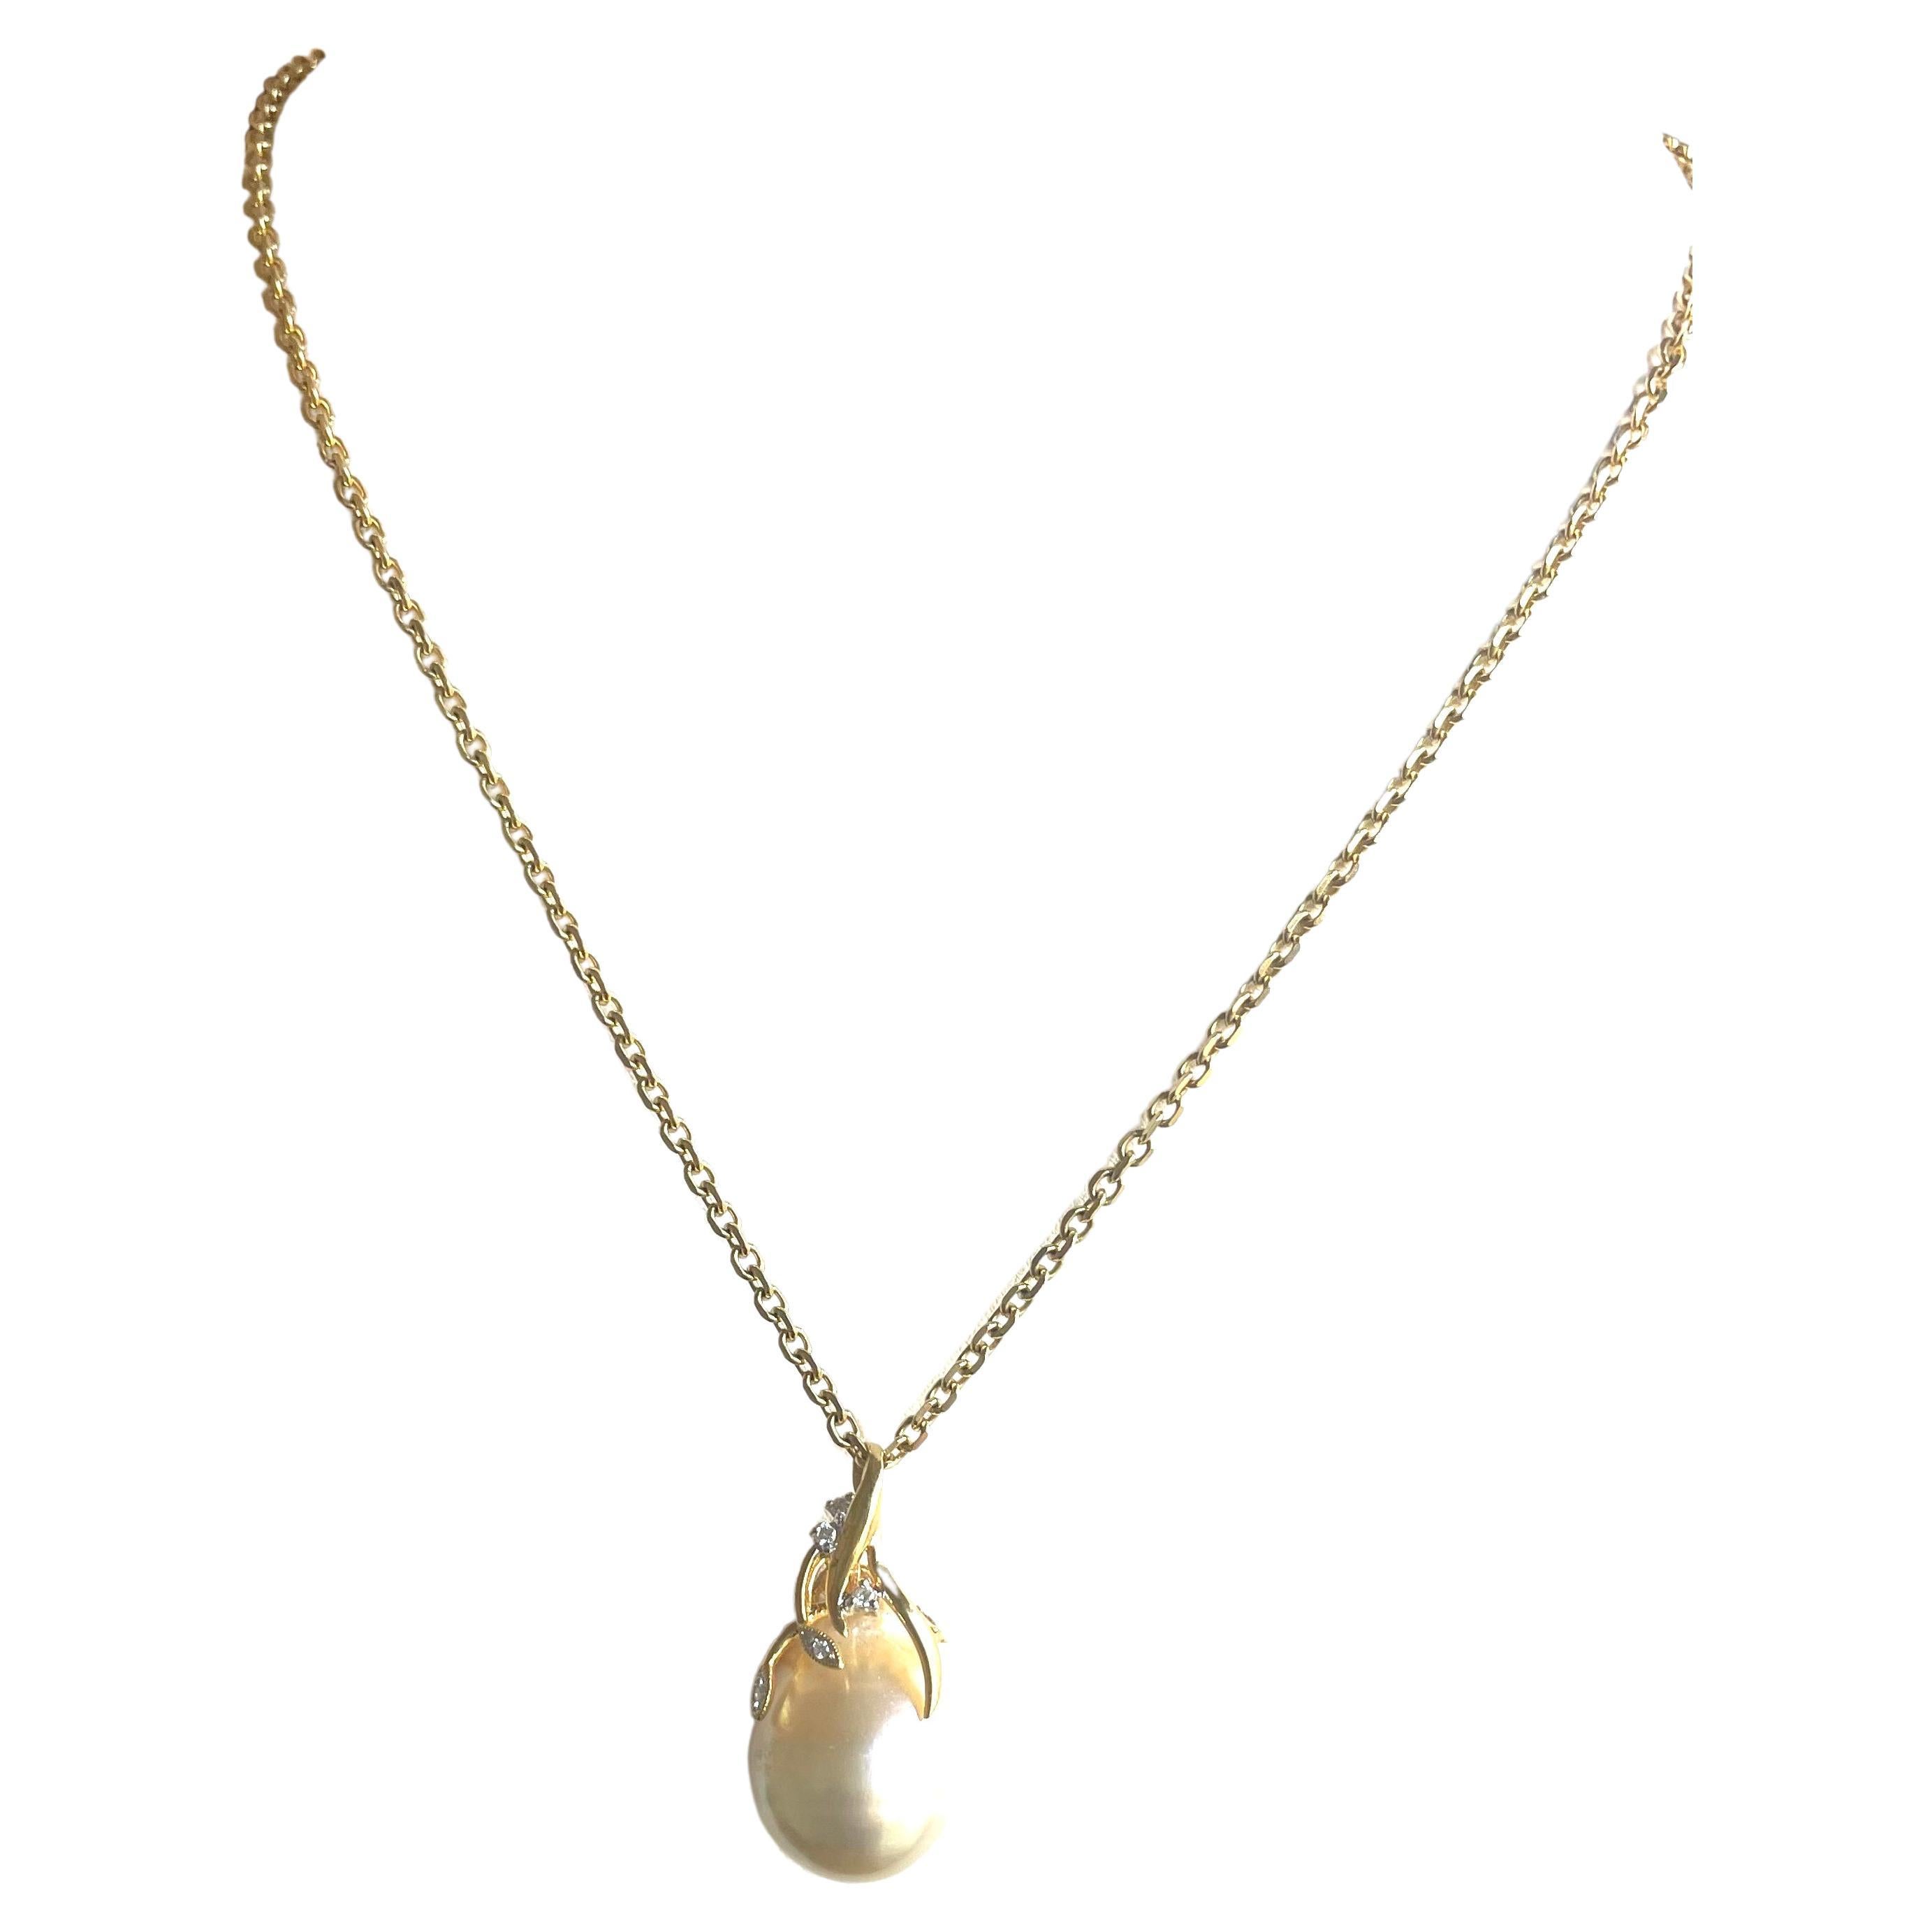 Description
Golden South Sea pearl pendant with diamonds on a 14k yellow gold chain.
Item #N3193. 
Check out matching earrings: 